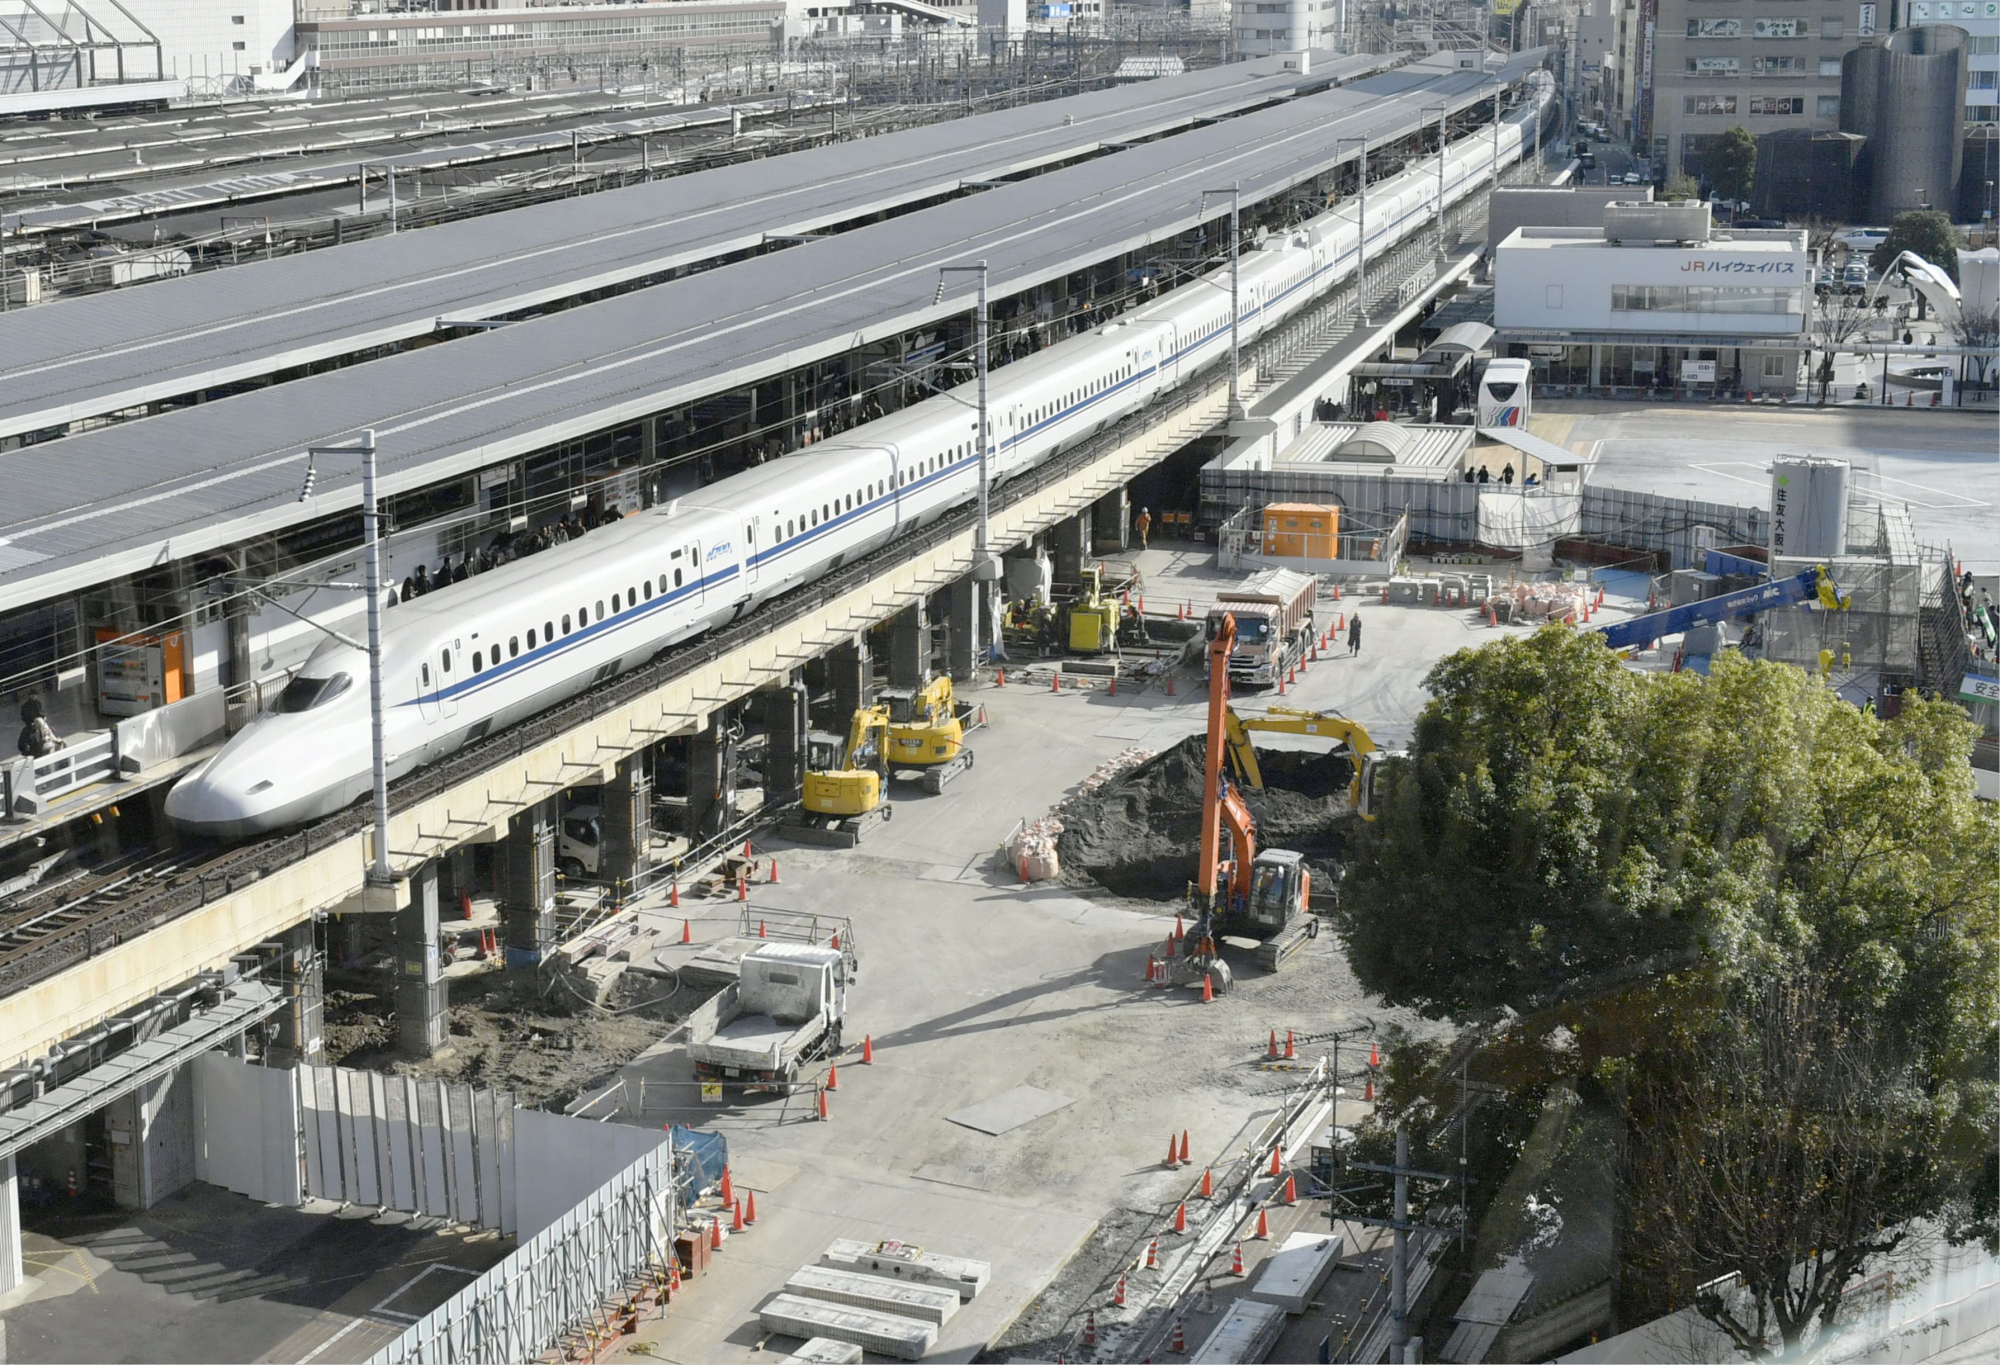 Off the rails: Construction has begun at Nagaya Station on the maglev train route. Four major Japanese contractors have been prosecuted for rigging bids for work on the project. | KYODO